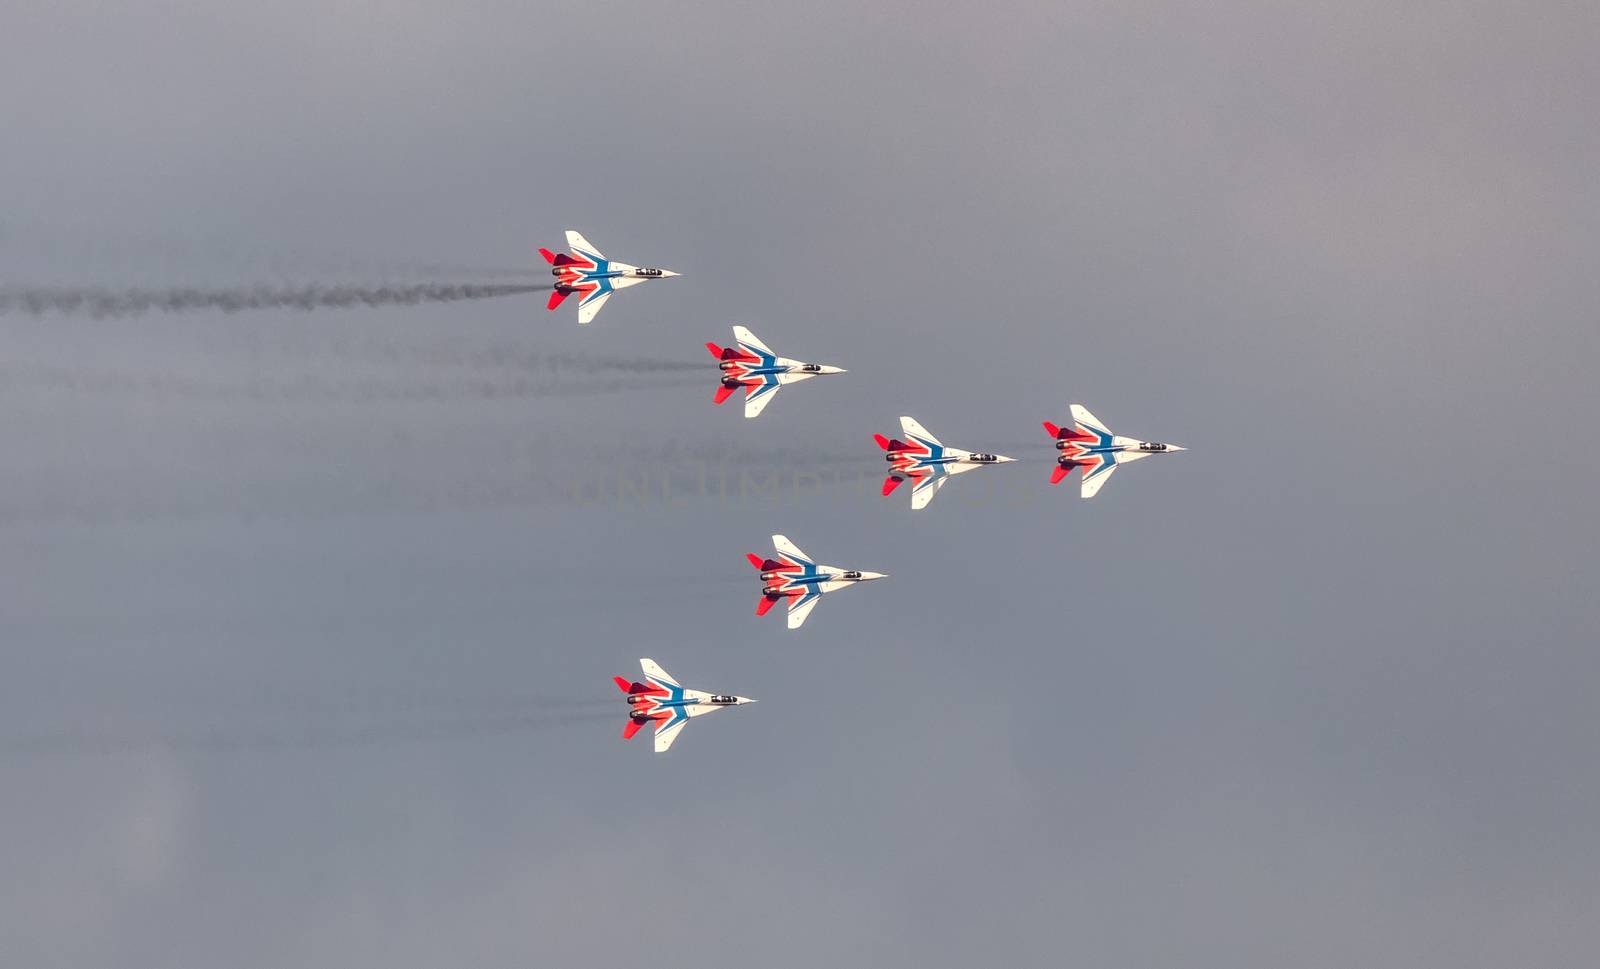 Barnaul, Russia - September 19, 2020: A low angle shot of Strizhi MiG-29 fighter jet squadron performing stunts during an aeroshow. Cloudy sky as a background.